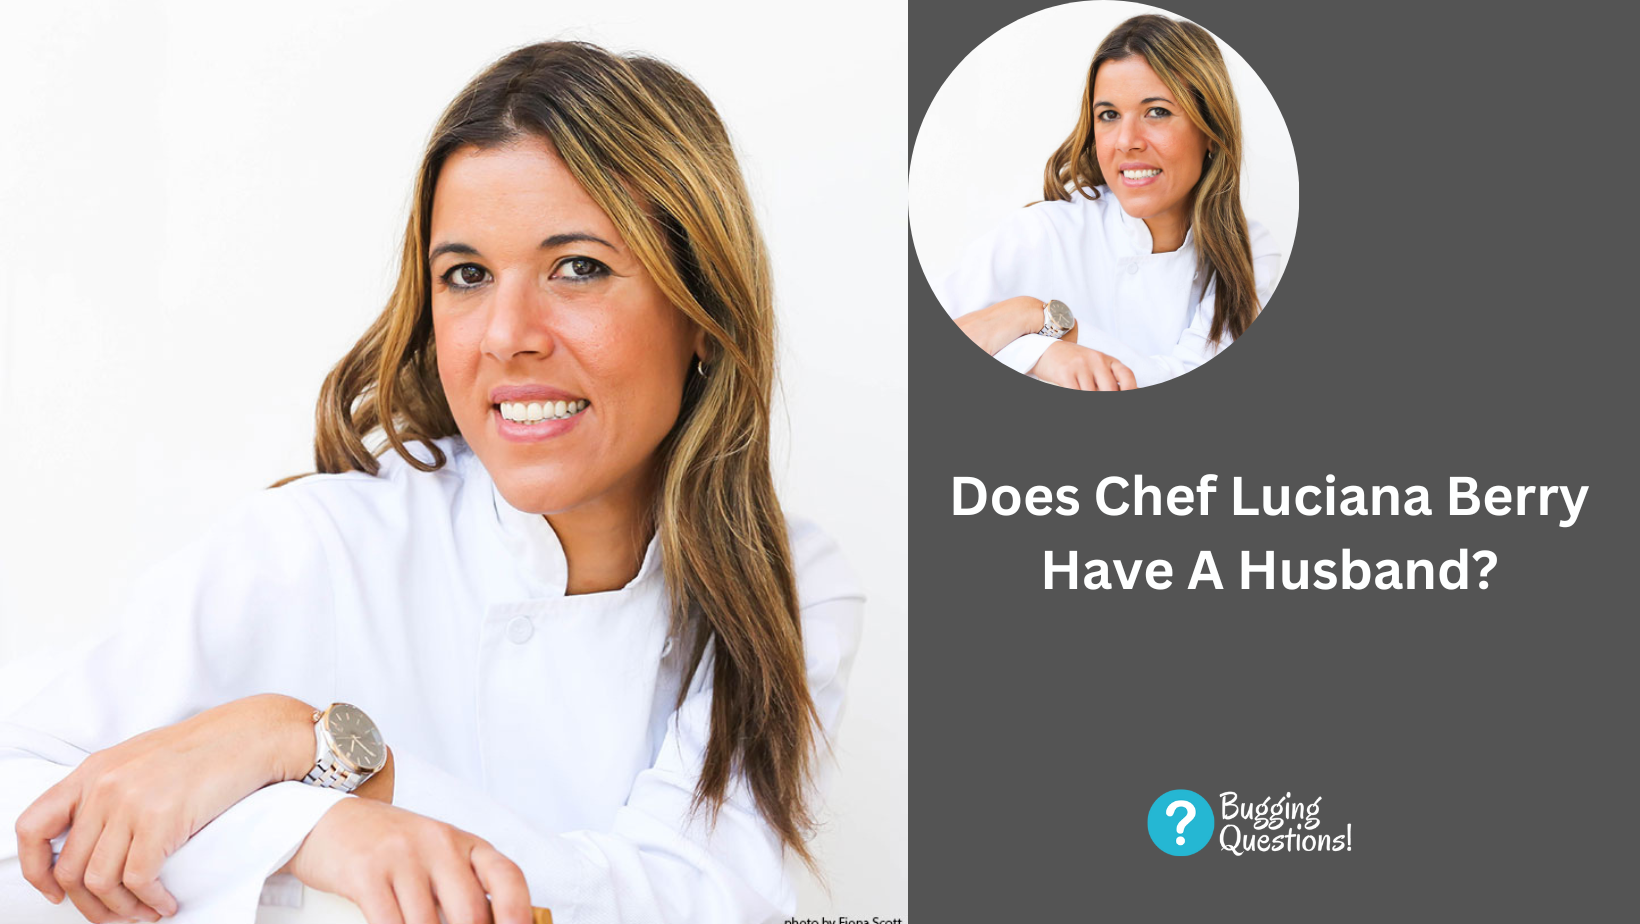 Does Chef Luciana Berry Have A Husband?